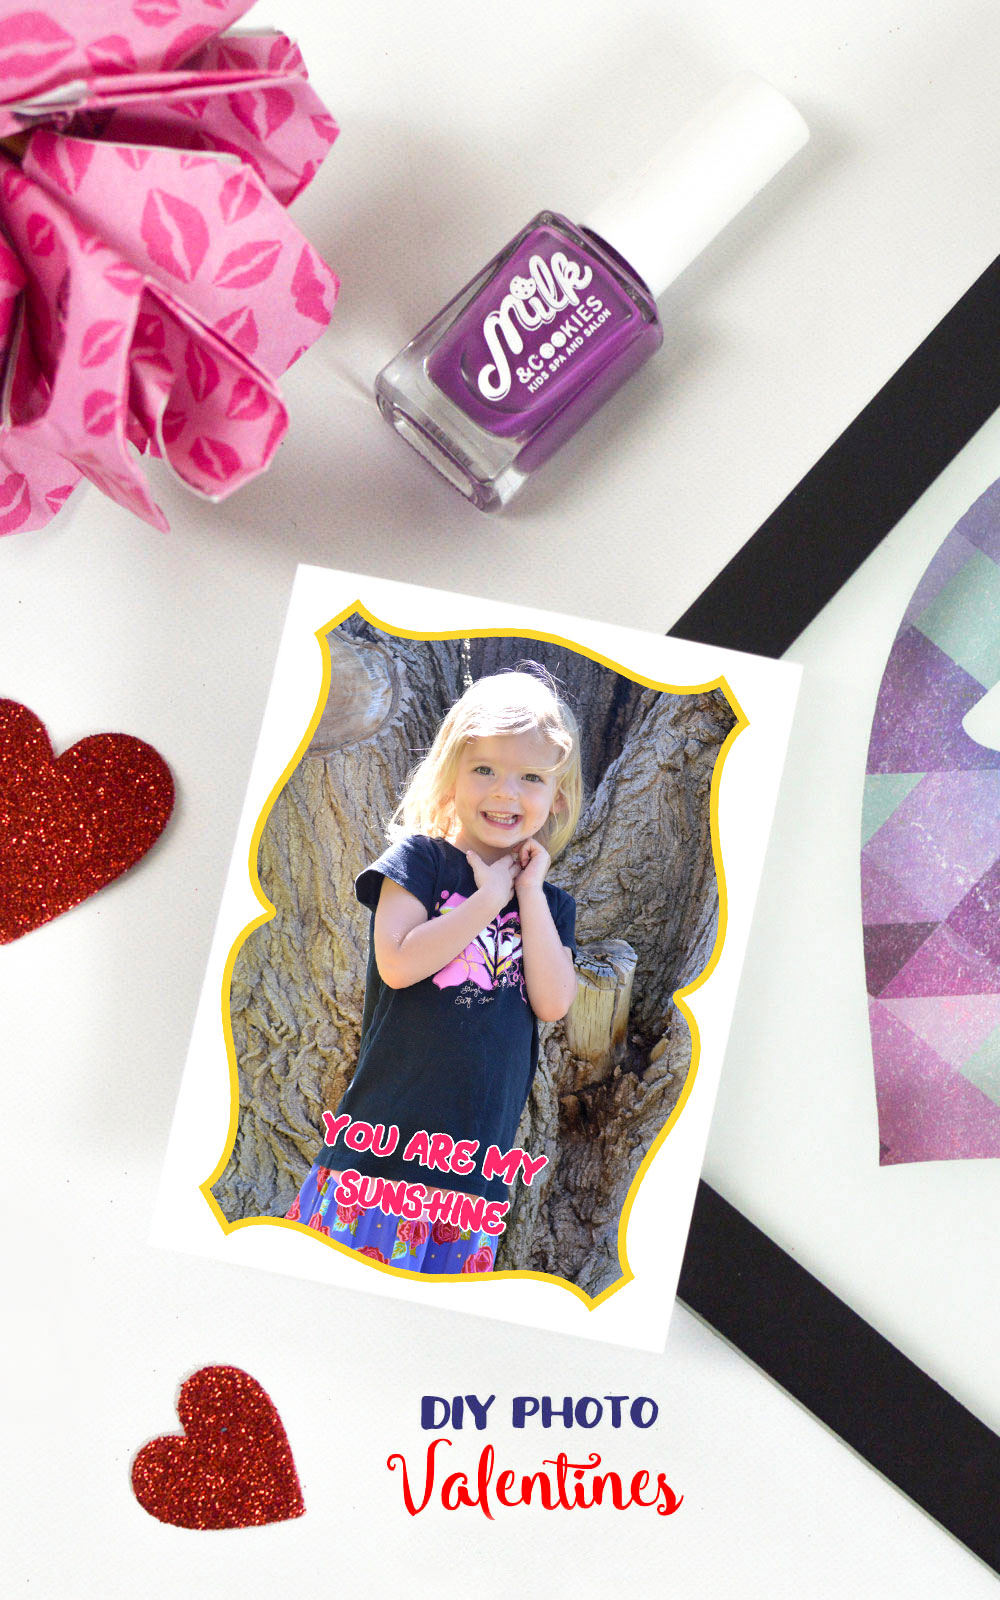 Make your own kids photo valentines for girls